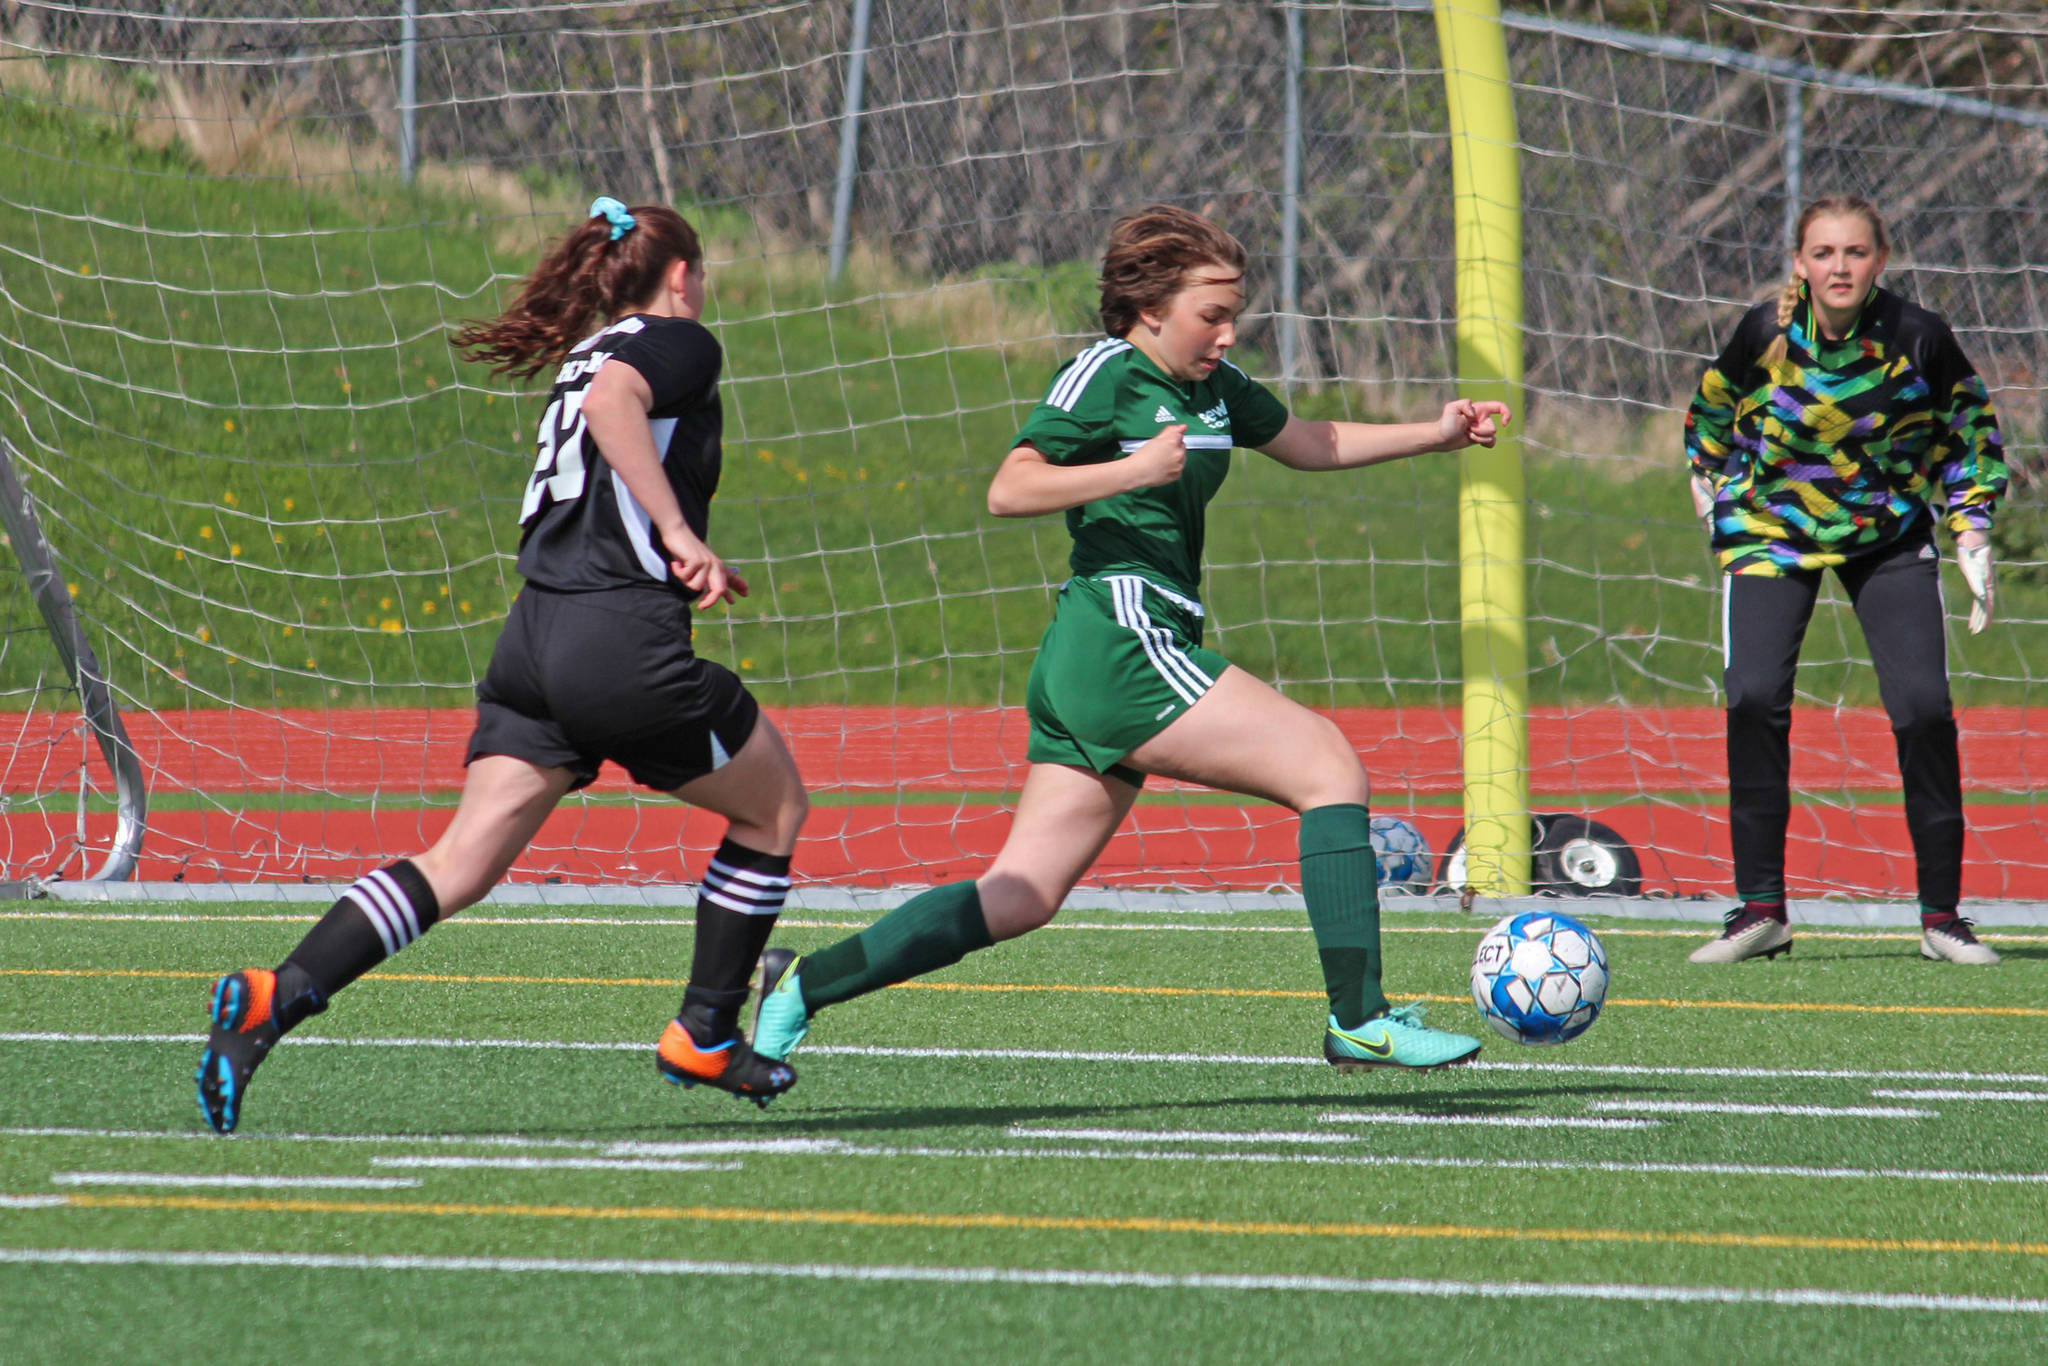 Seward’s Mikya Wallace steals the ball from Nikiski’s Tawnisha Freeman before she can make a shot during the first girls game of the Peninsula Conference Soccer Tournament on Thursday, May 16, 2019 at Homer High School in Homer, Alaska. (Photo by Megan Pacer/Homer News)